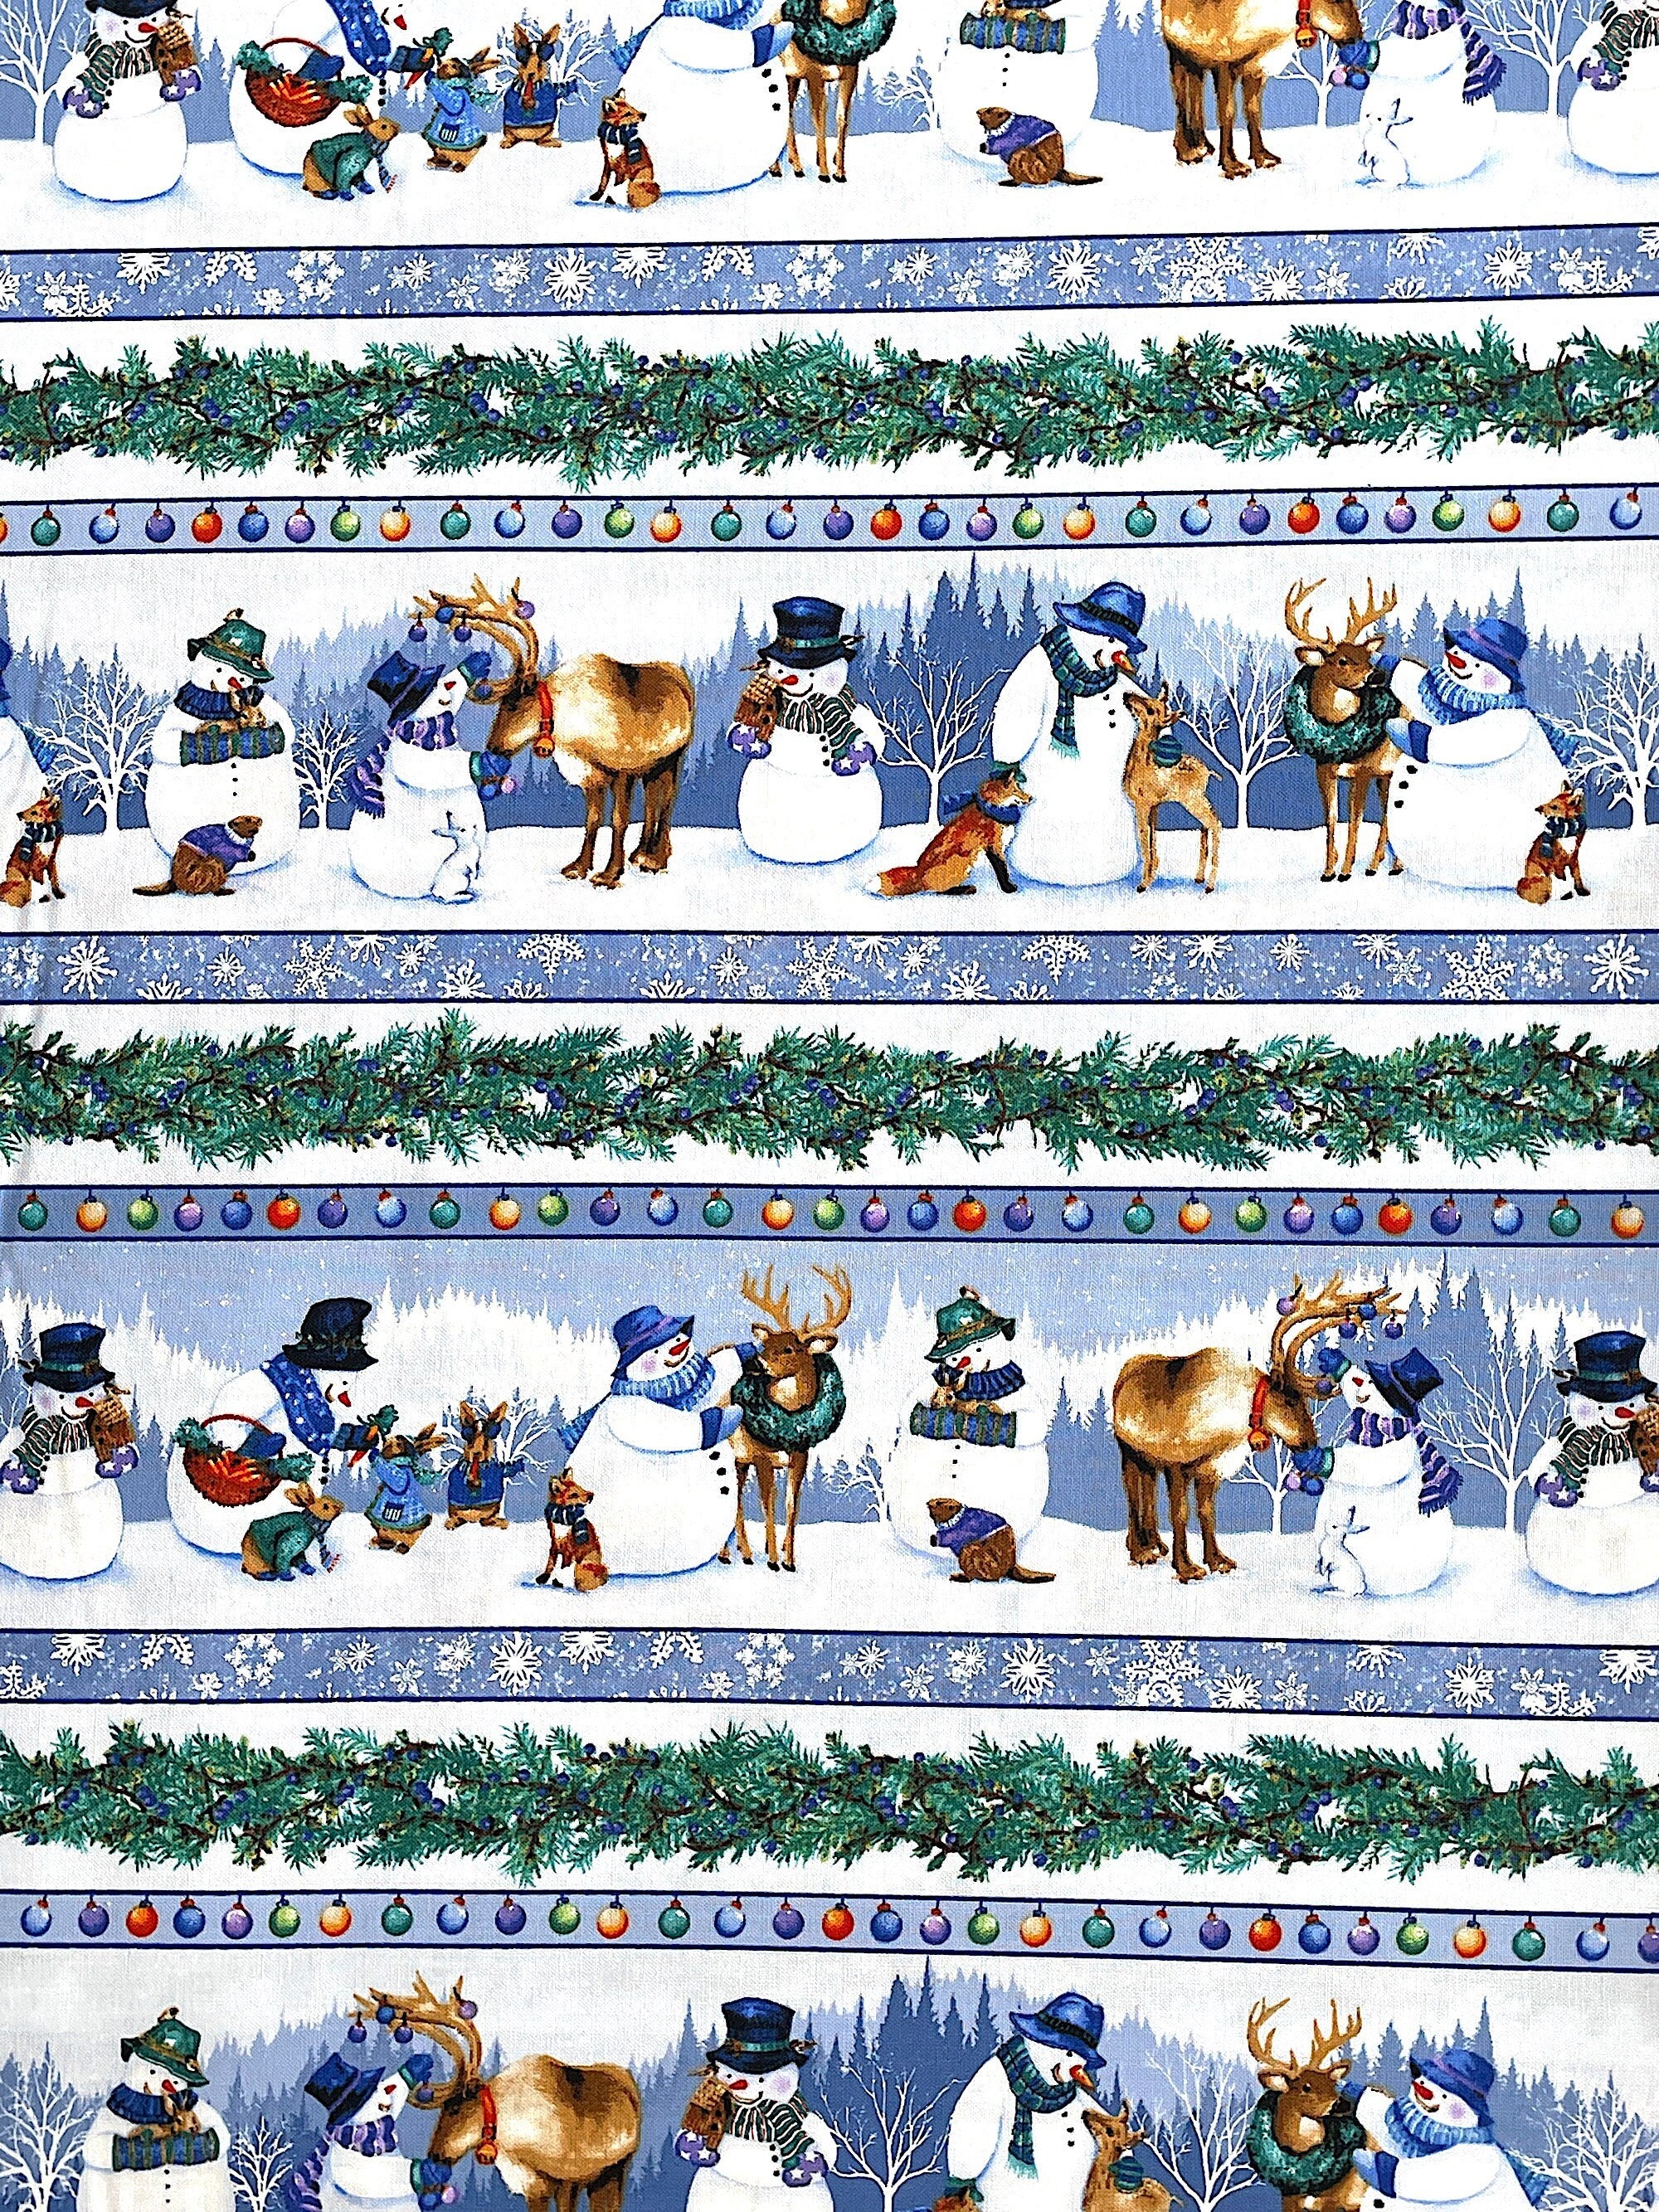 This fabric has stripes of snowflakes, Christmas ornaments, garland and snowman with wildlife.